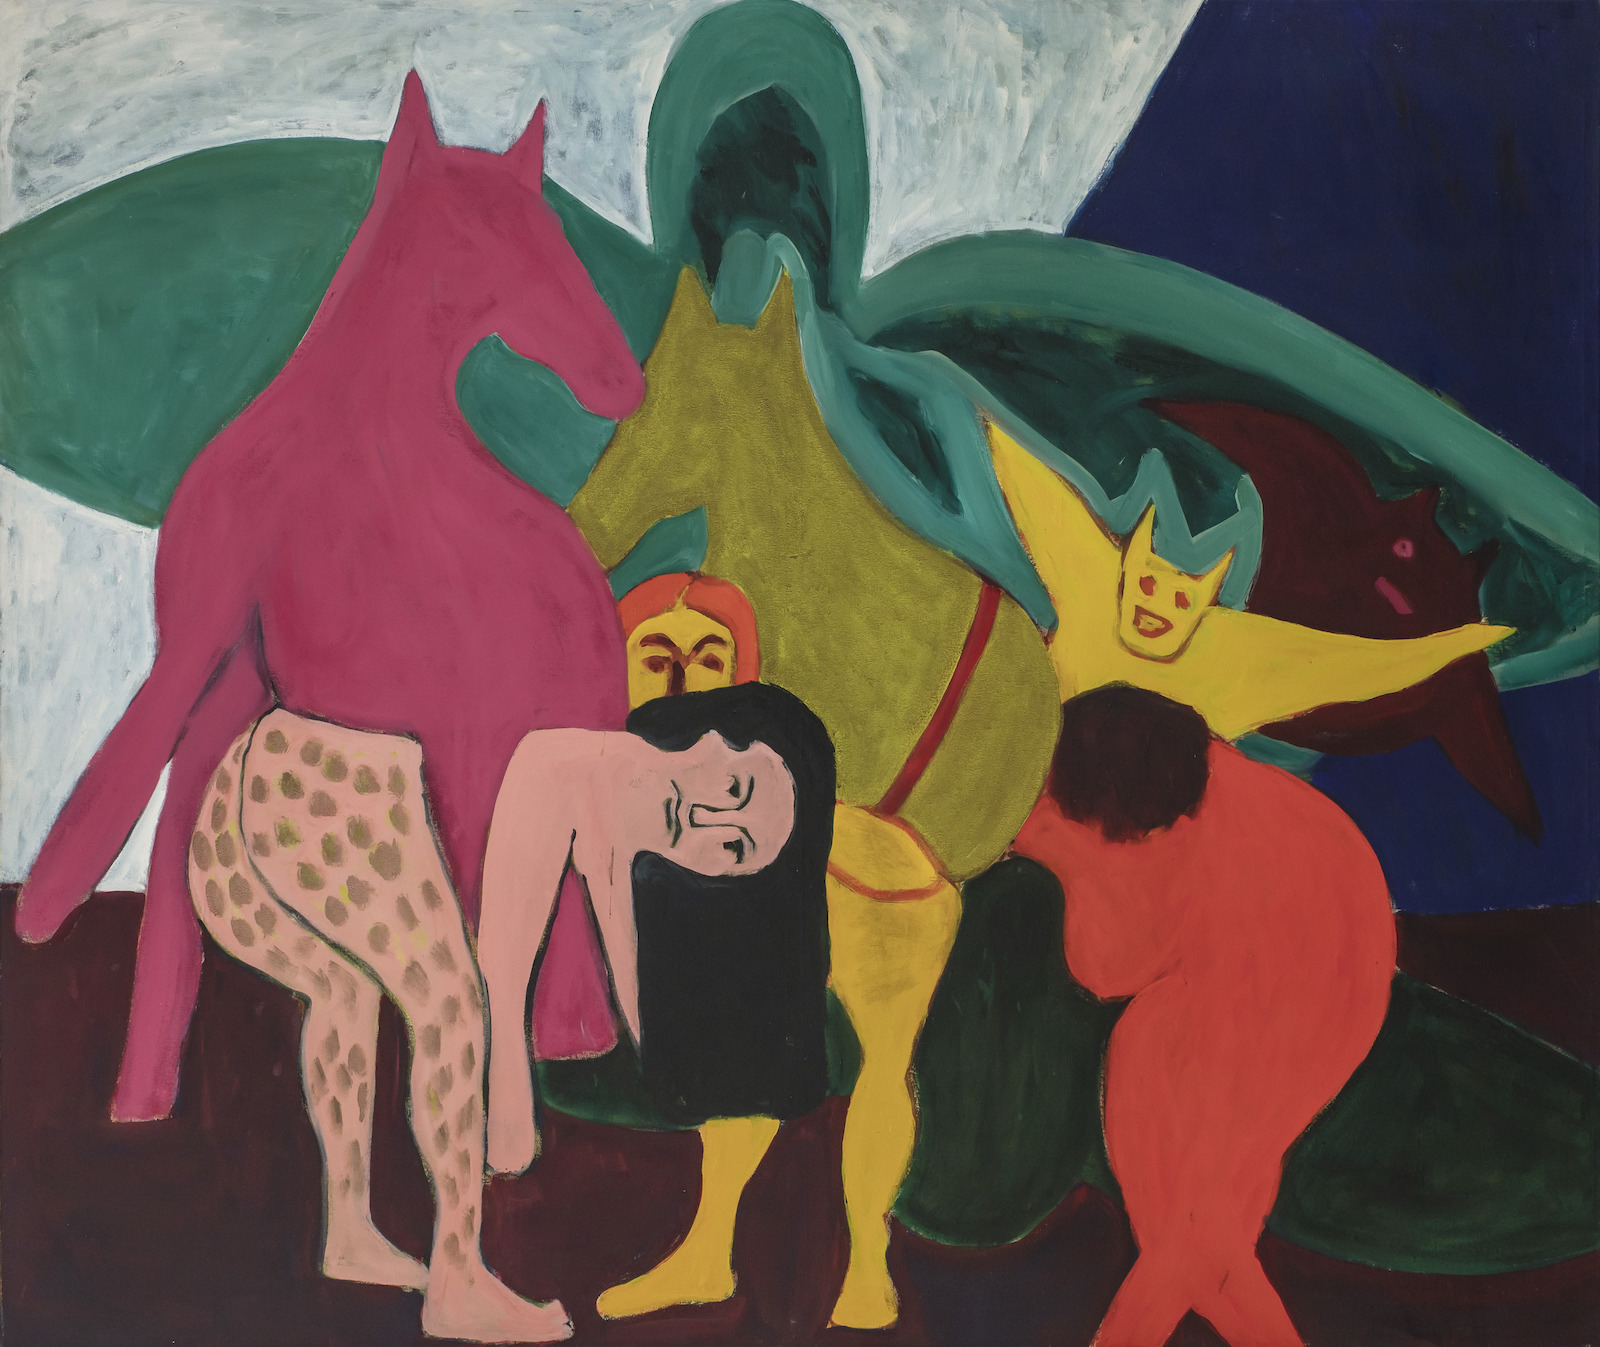 A vividly colored painting of several animal and human figures entwined in an abstract landscape